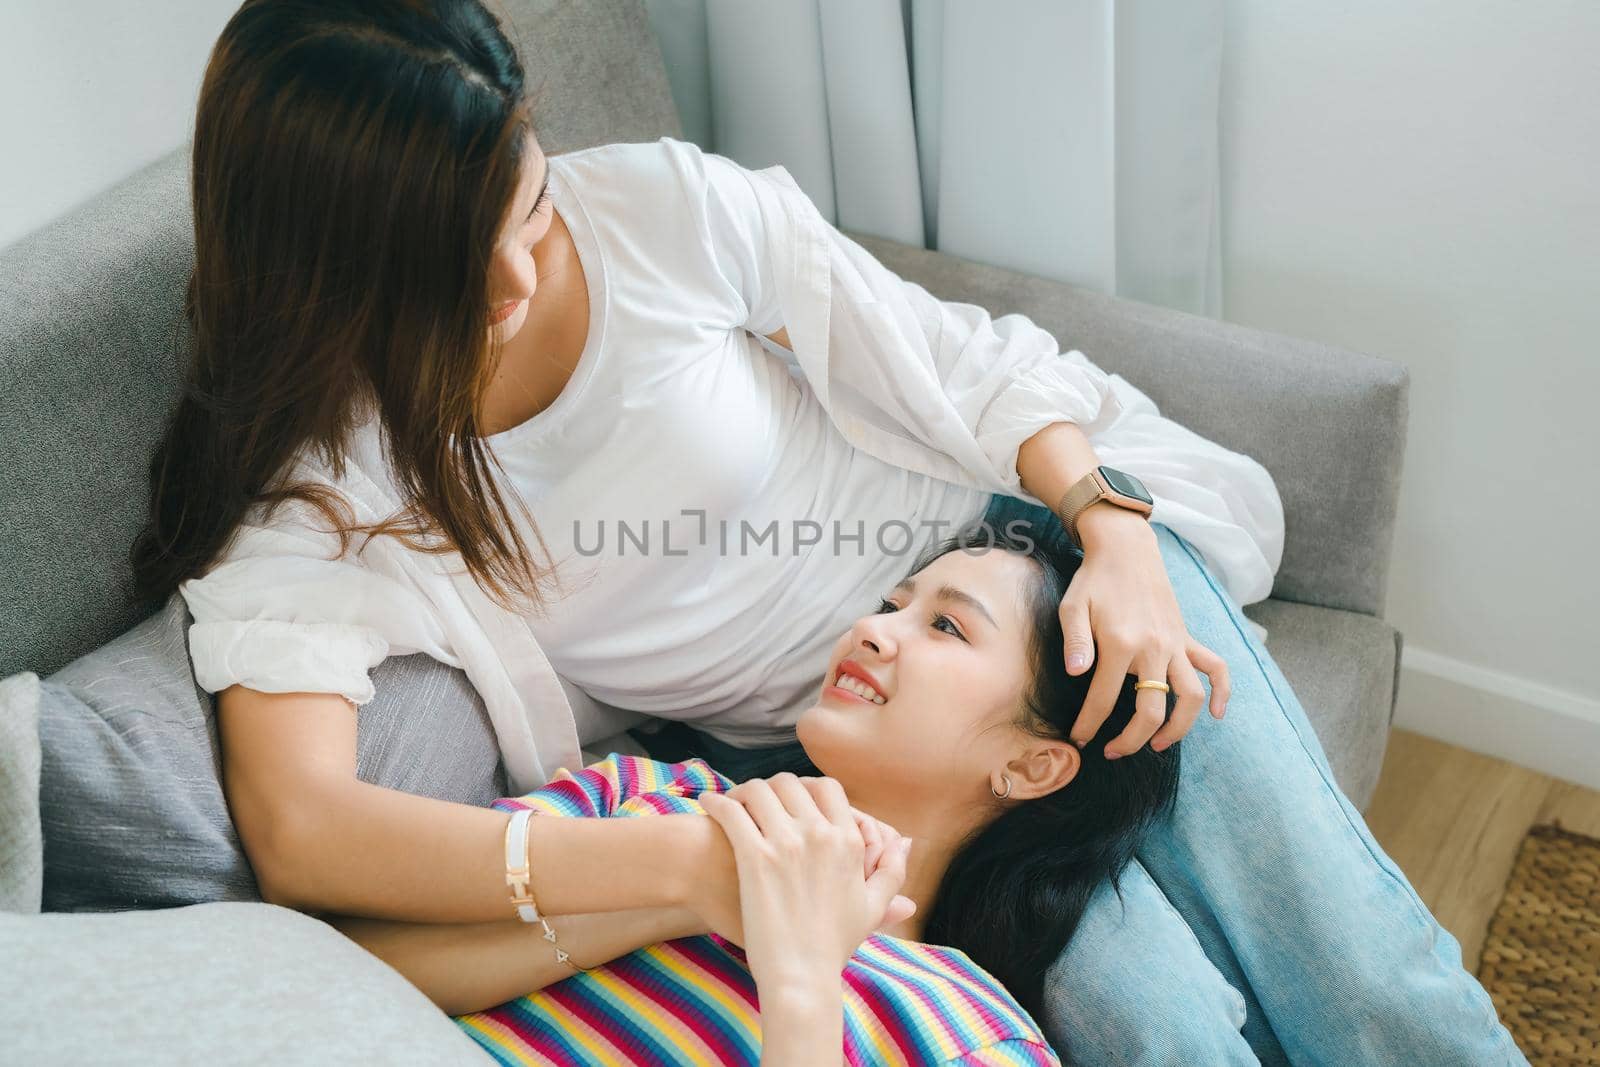 lgbtq, lgbt concept, homosexuality, portrait of two Asian women posing happy together and showing love for each other while being together.